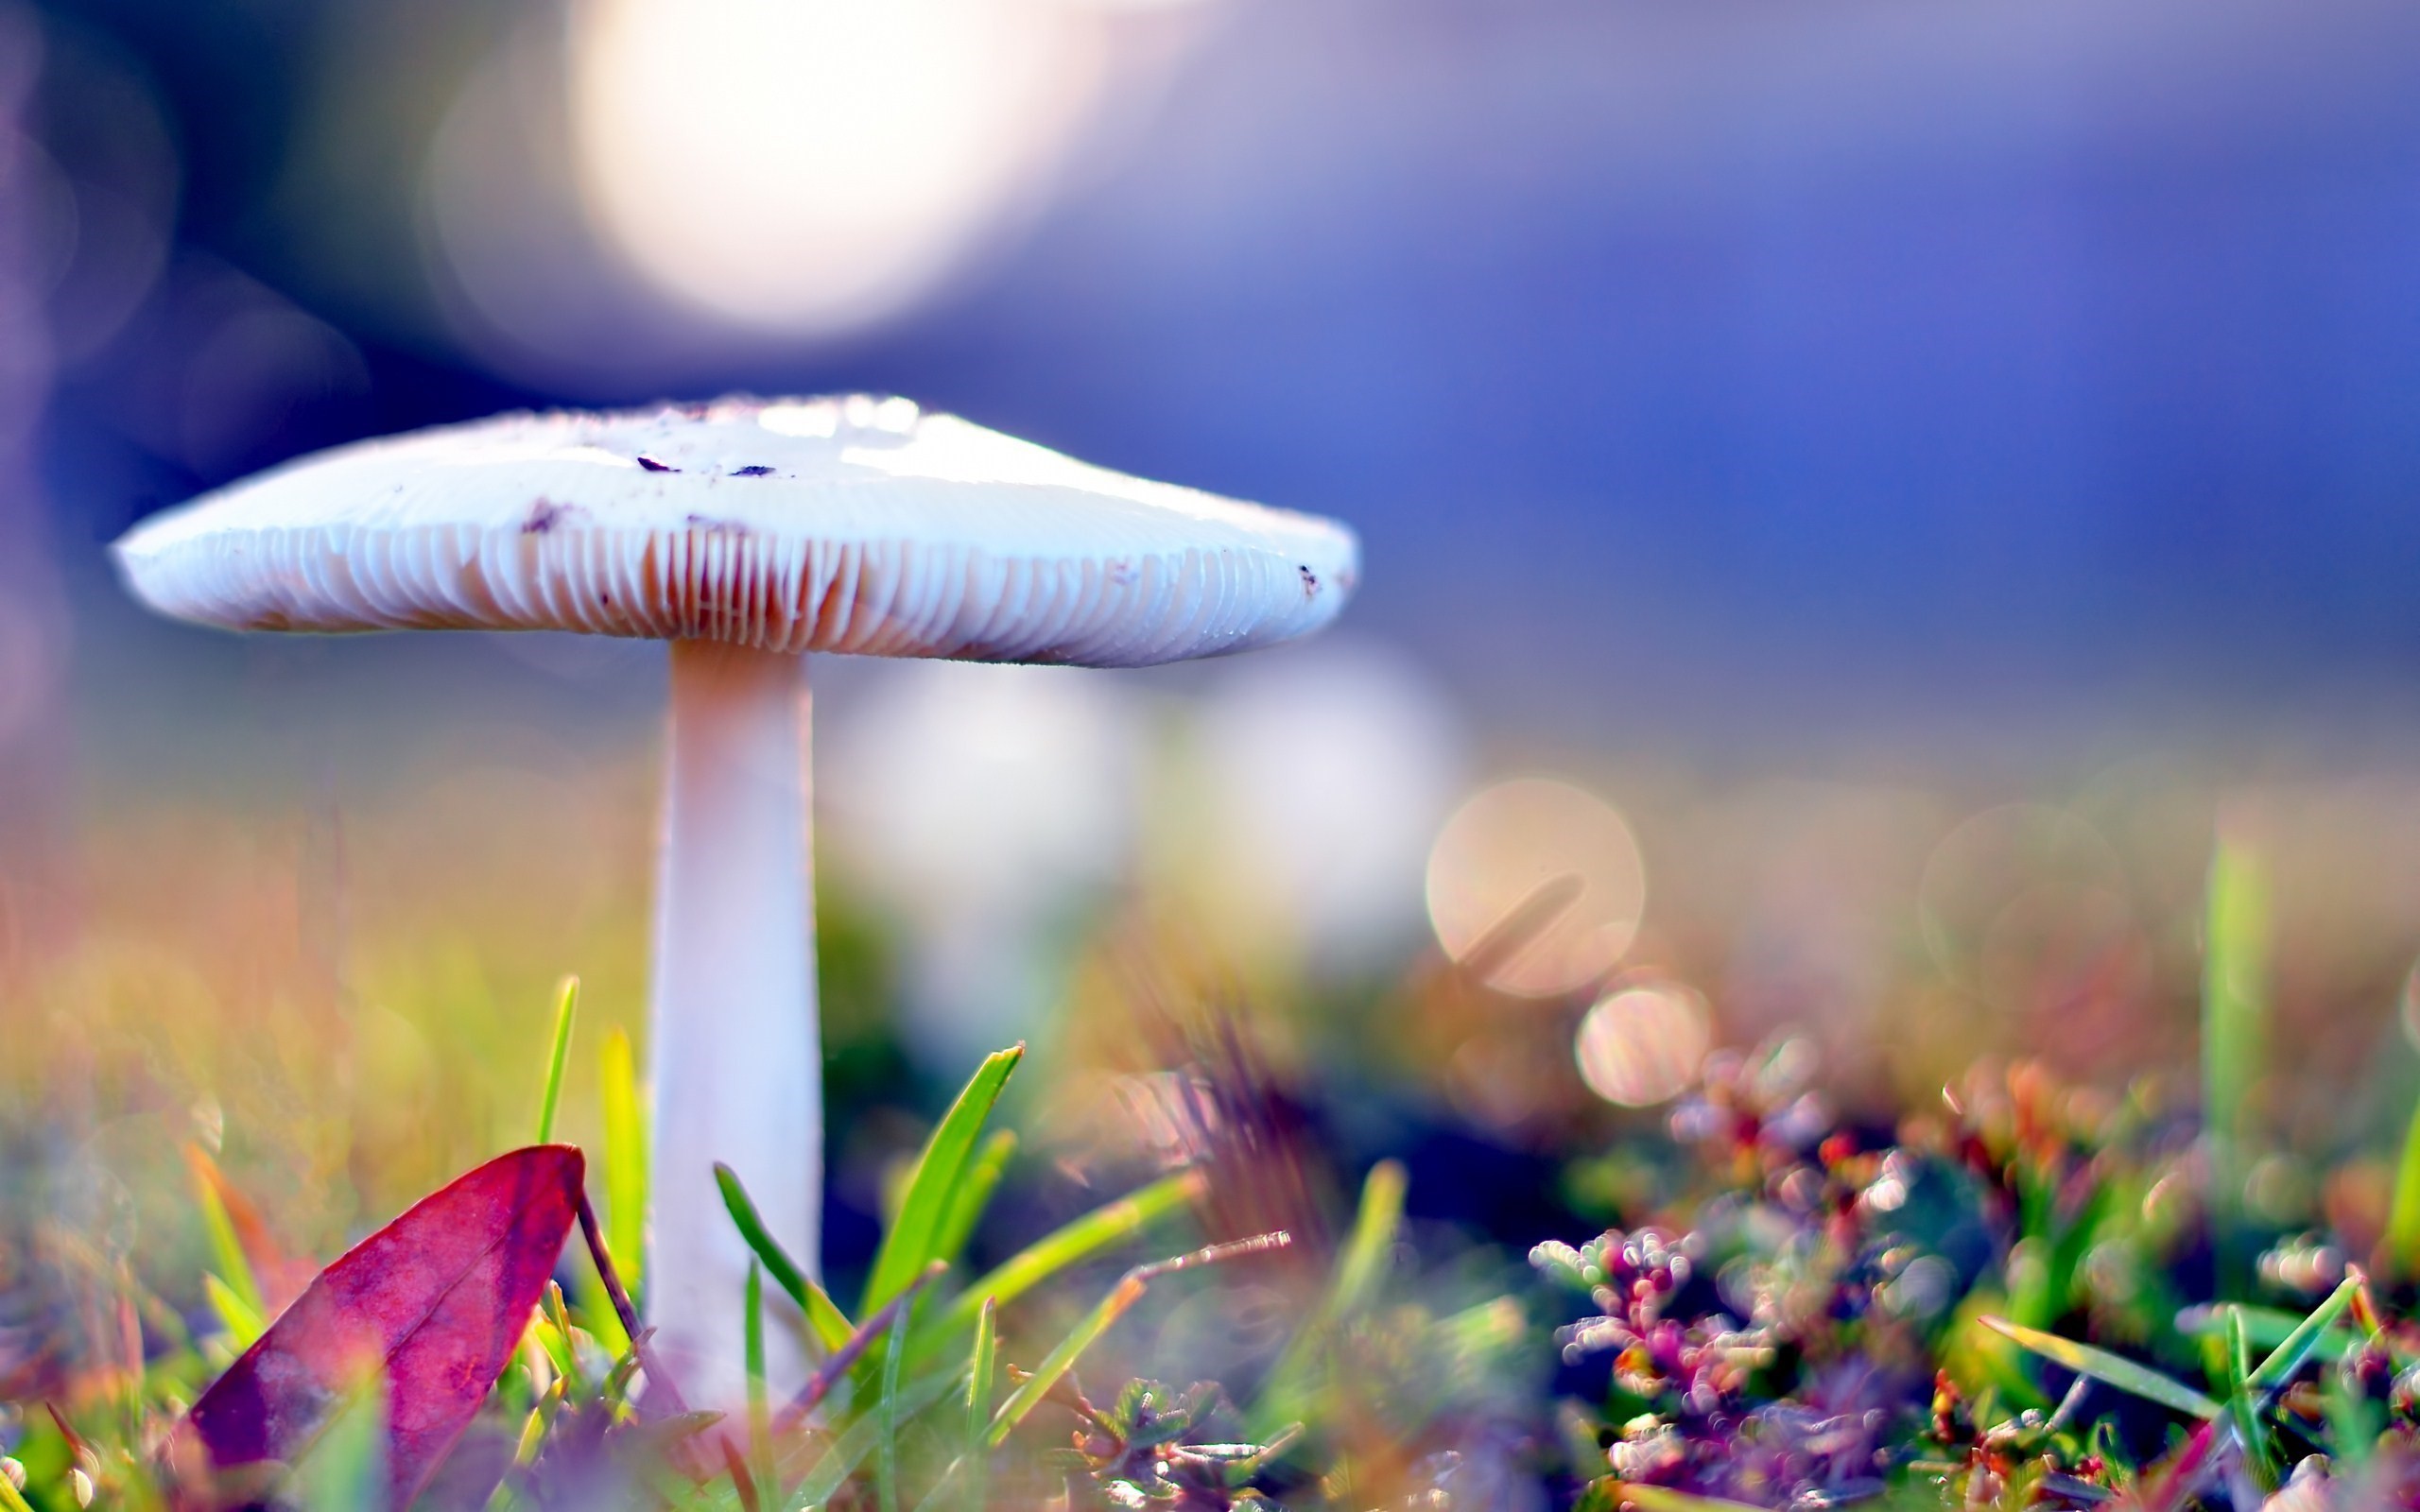 wallpapers new latest,nature,natural landscape,sky,mushroom,macro photography